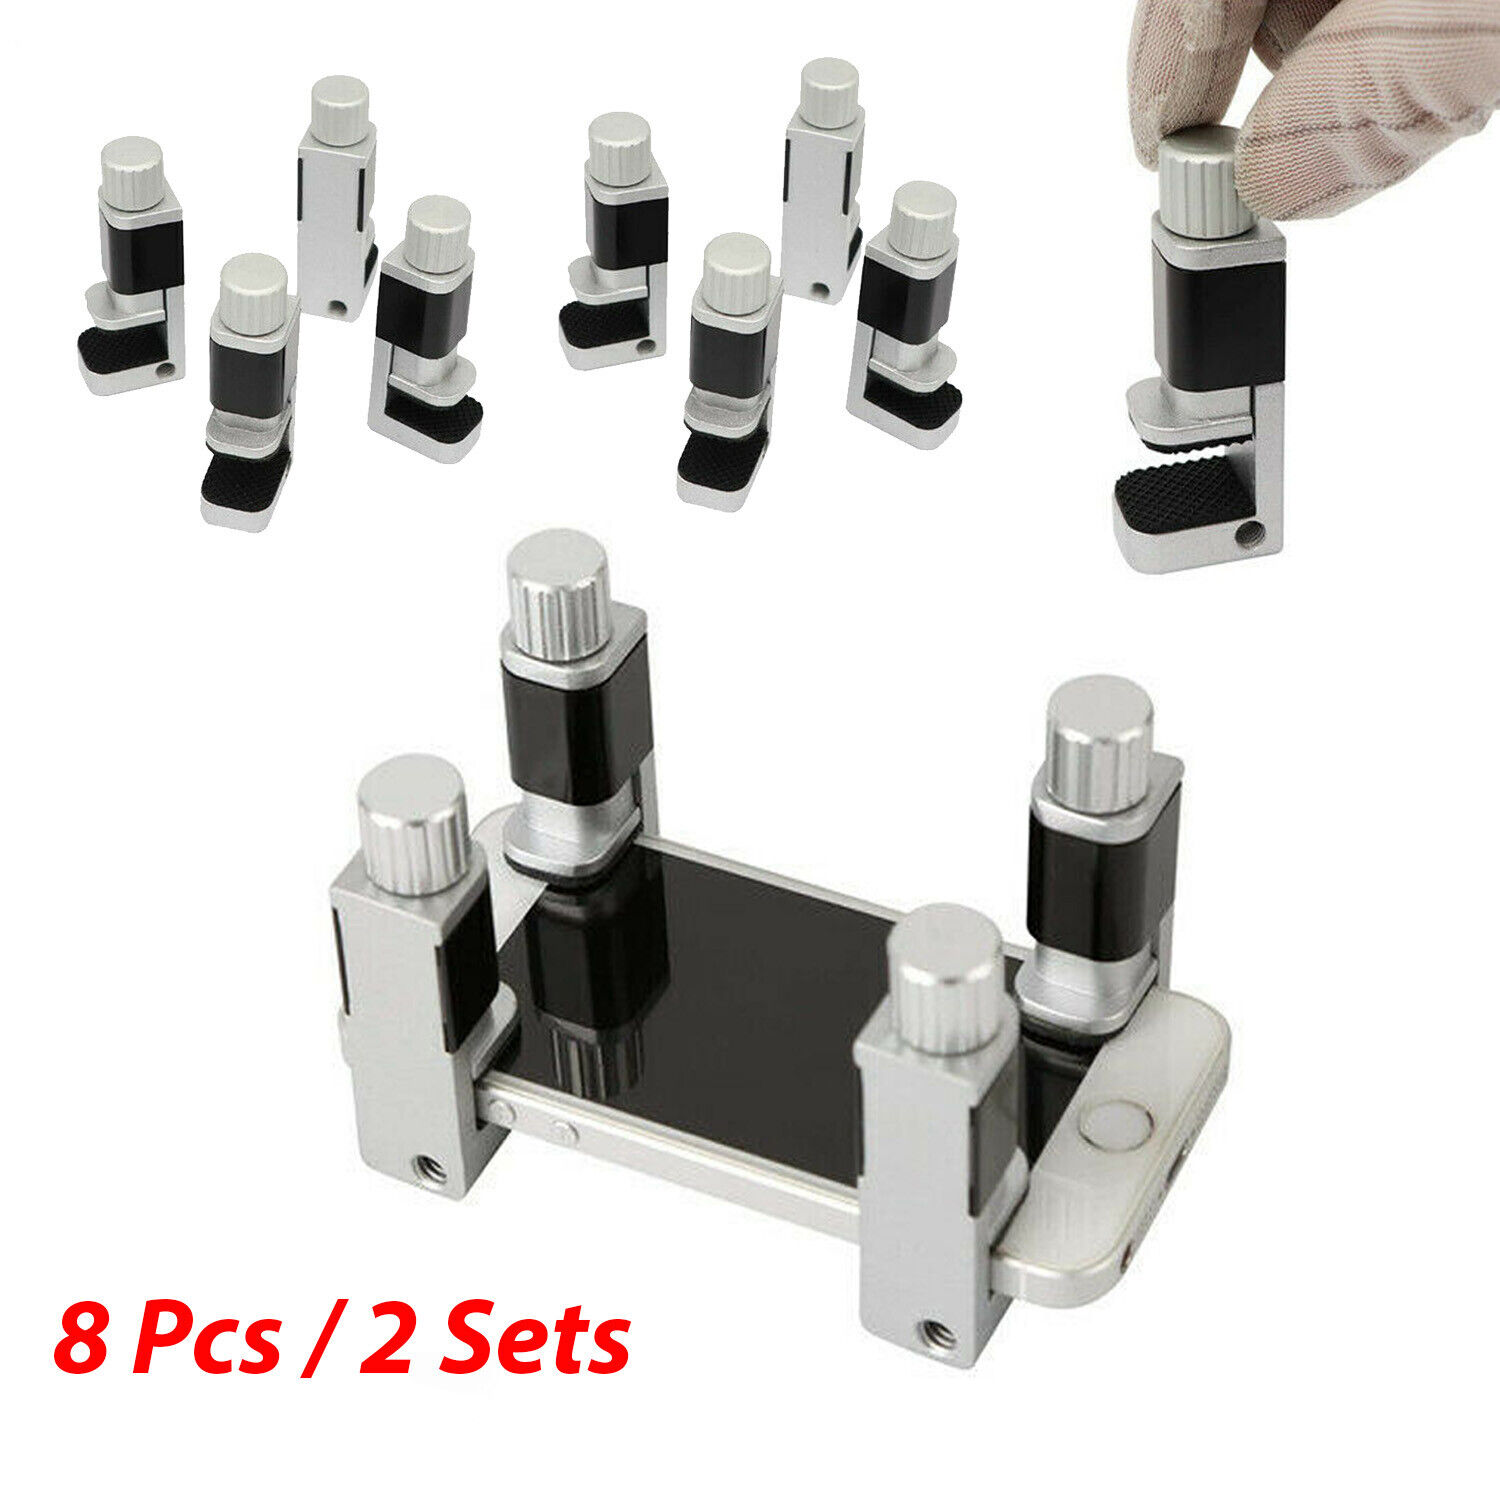 8Pcs Phone LCD Screen Fastening Clamps Fixture Adjustable Clip Repair Tools Unbranded Does not apply